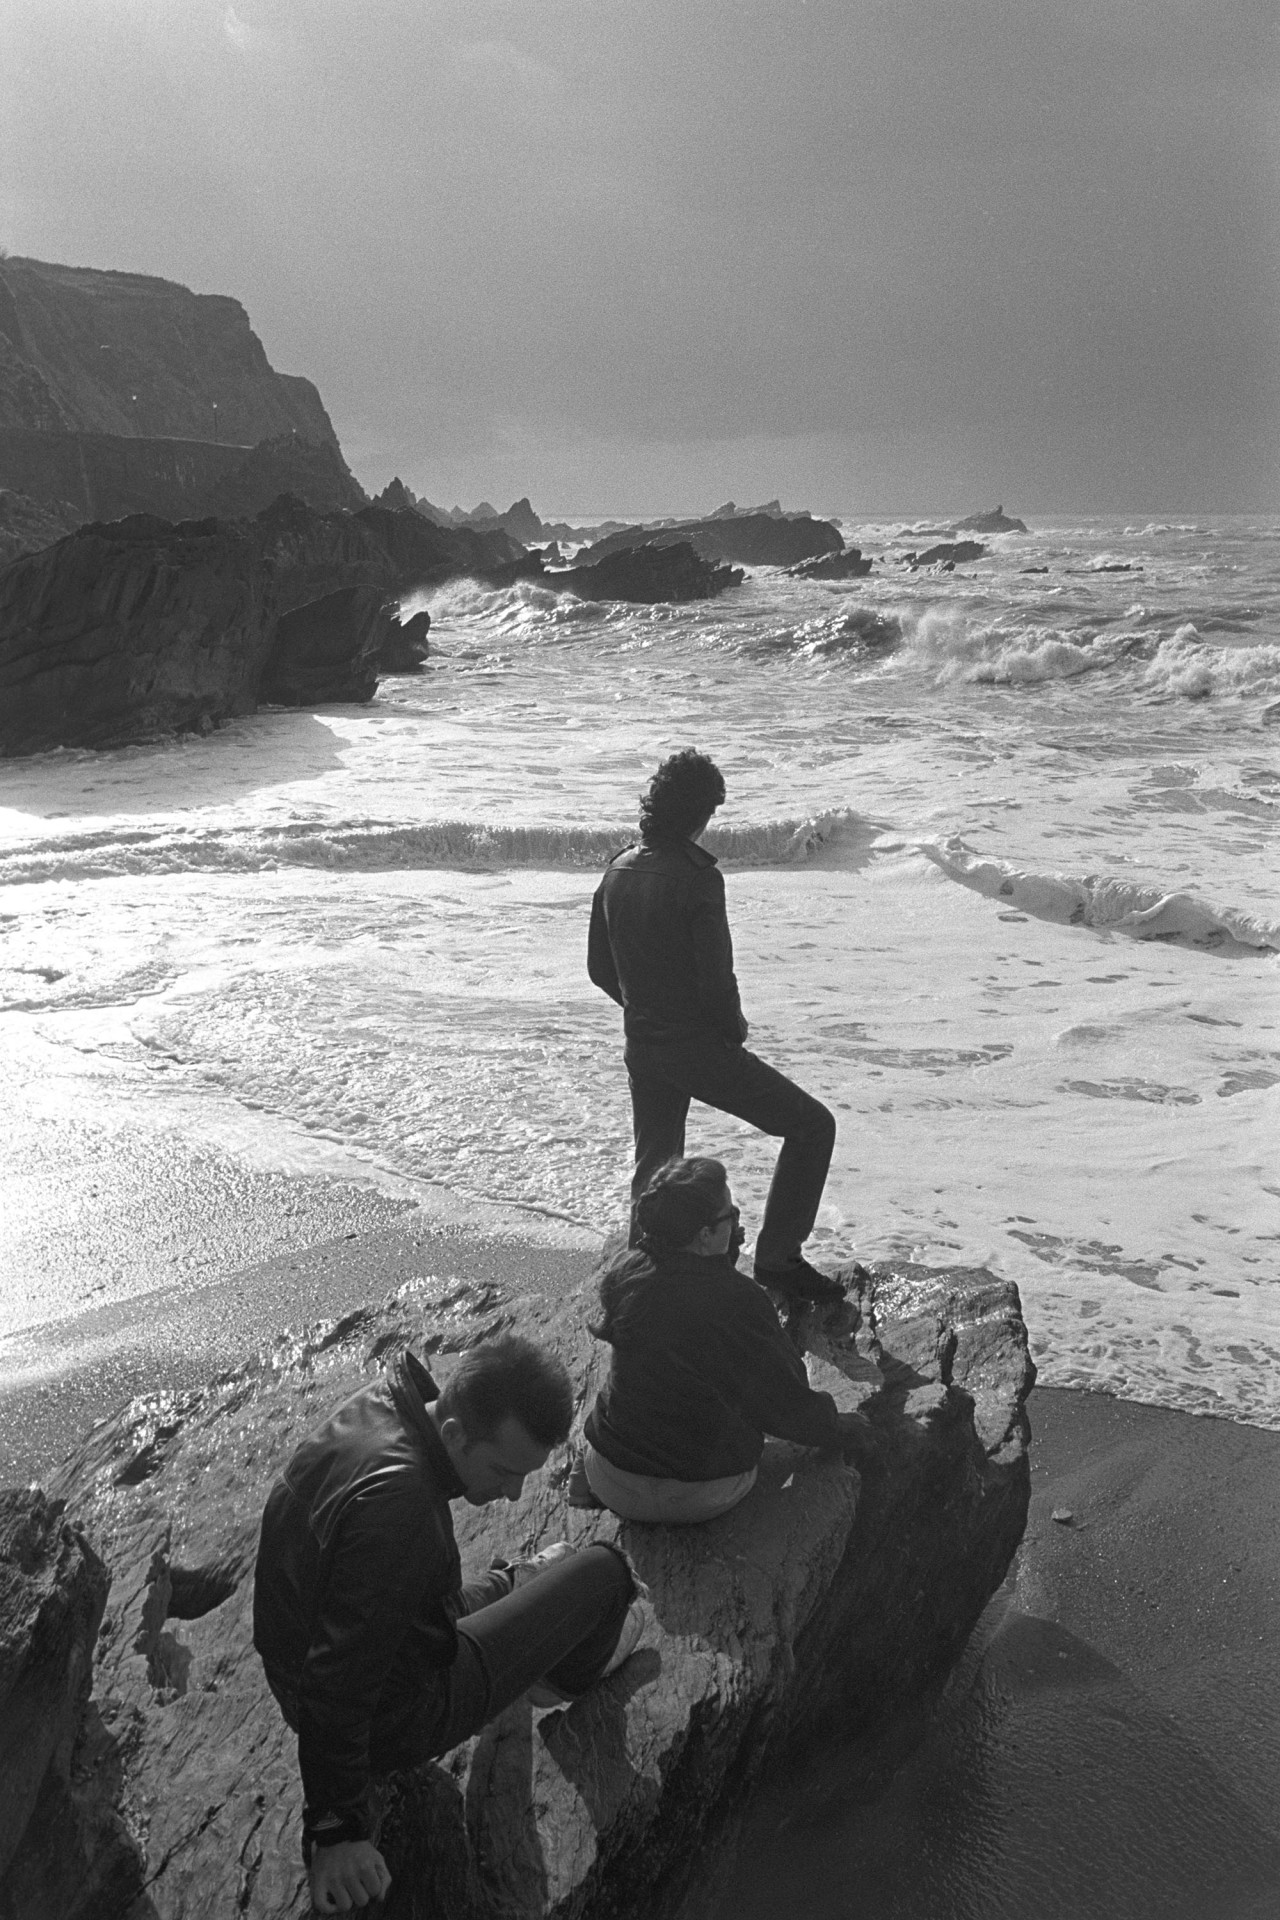 Youths on rock contemplating stormy sea and sky. 
[Two young men and a woman stood and sat on a large rock at Ilfracombe beach, looking out at the rough sea and stormy sky.]